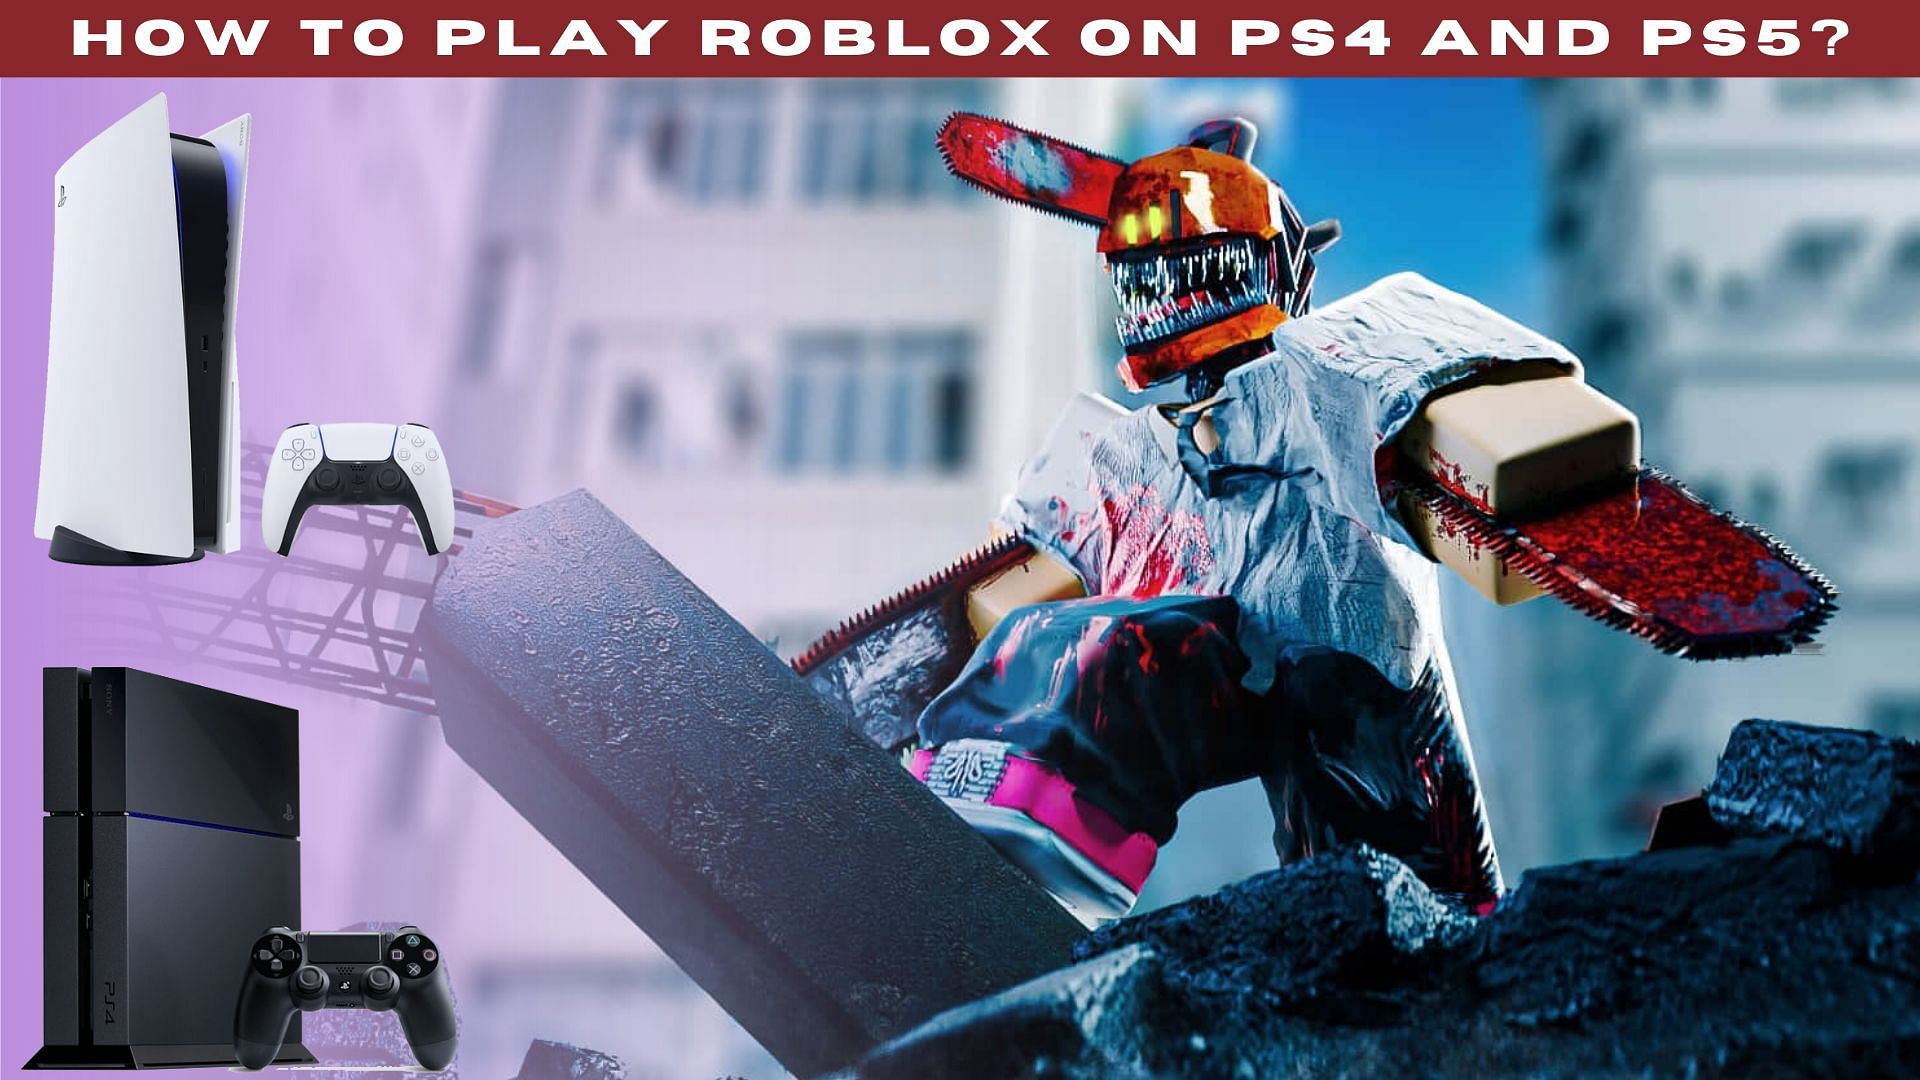 Roblox coming to PlayStation 4 and PS5 next month - release date and price